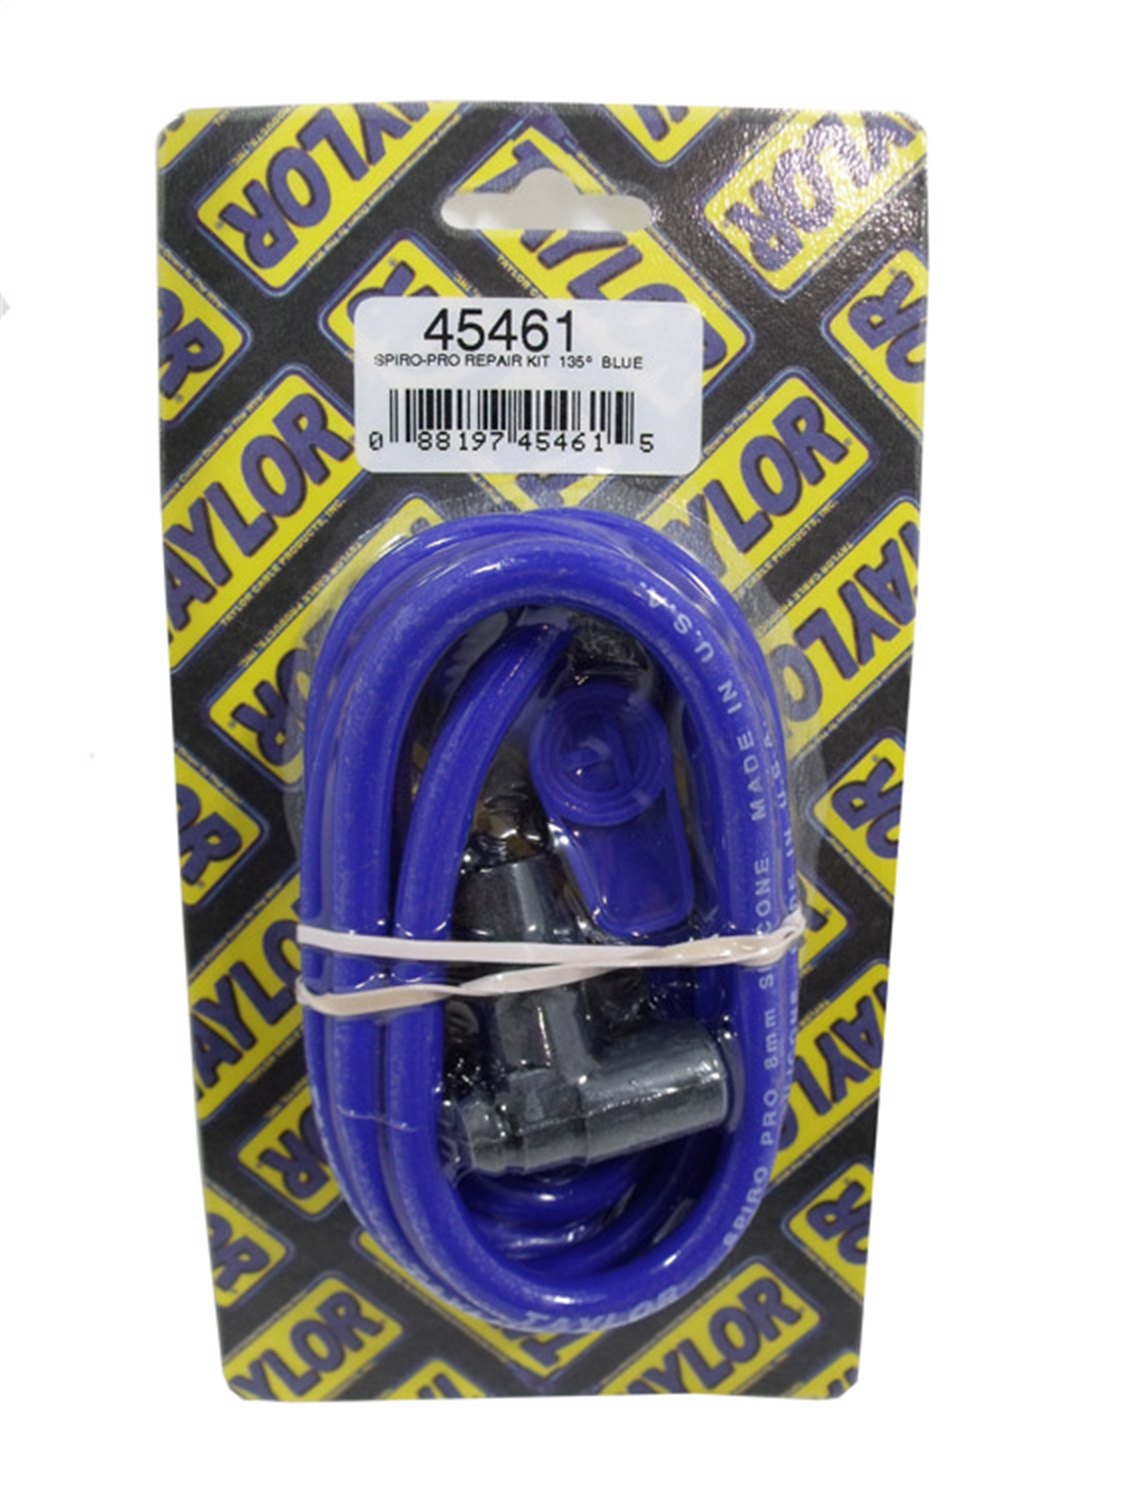 Taylor Cable Taylor Cable 45461 8mm Spiro Pro; Spark Plug Wire Repair Kit